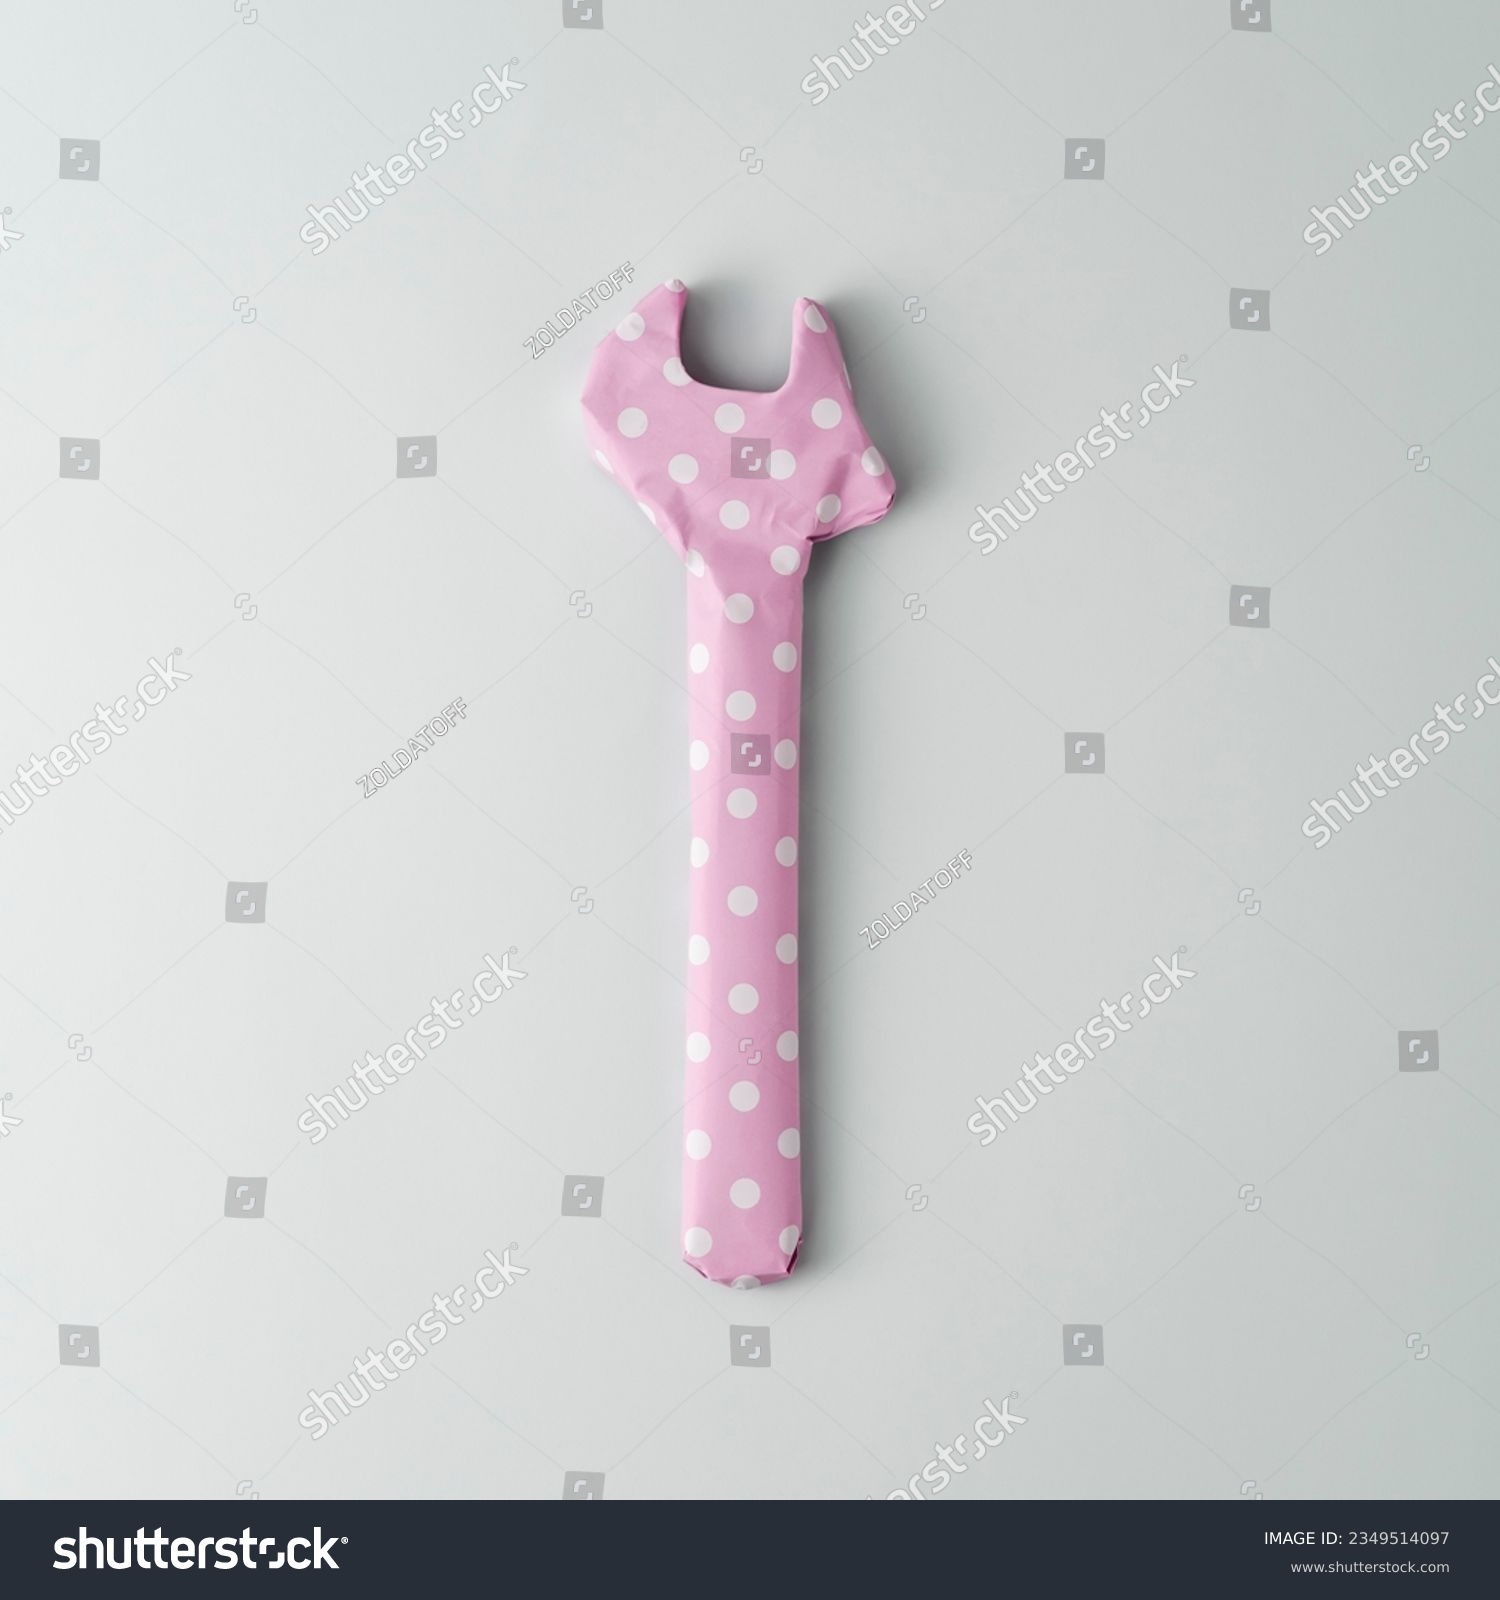 Wrench wrapped in pink polka dot gift paper on blue background. Top view.   #2349514097